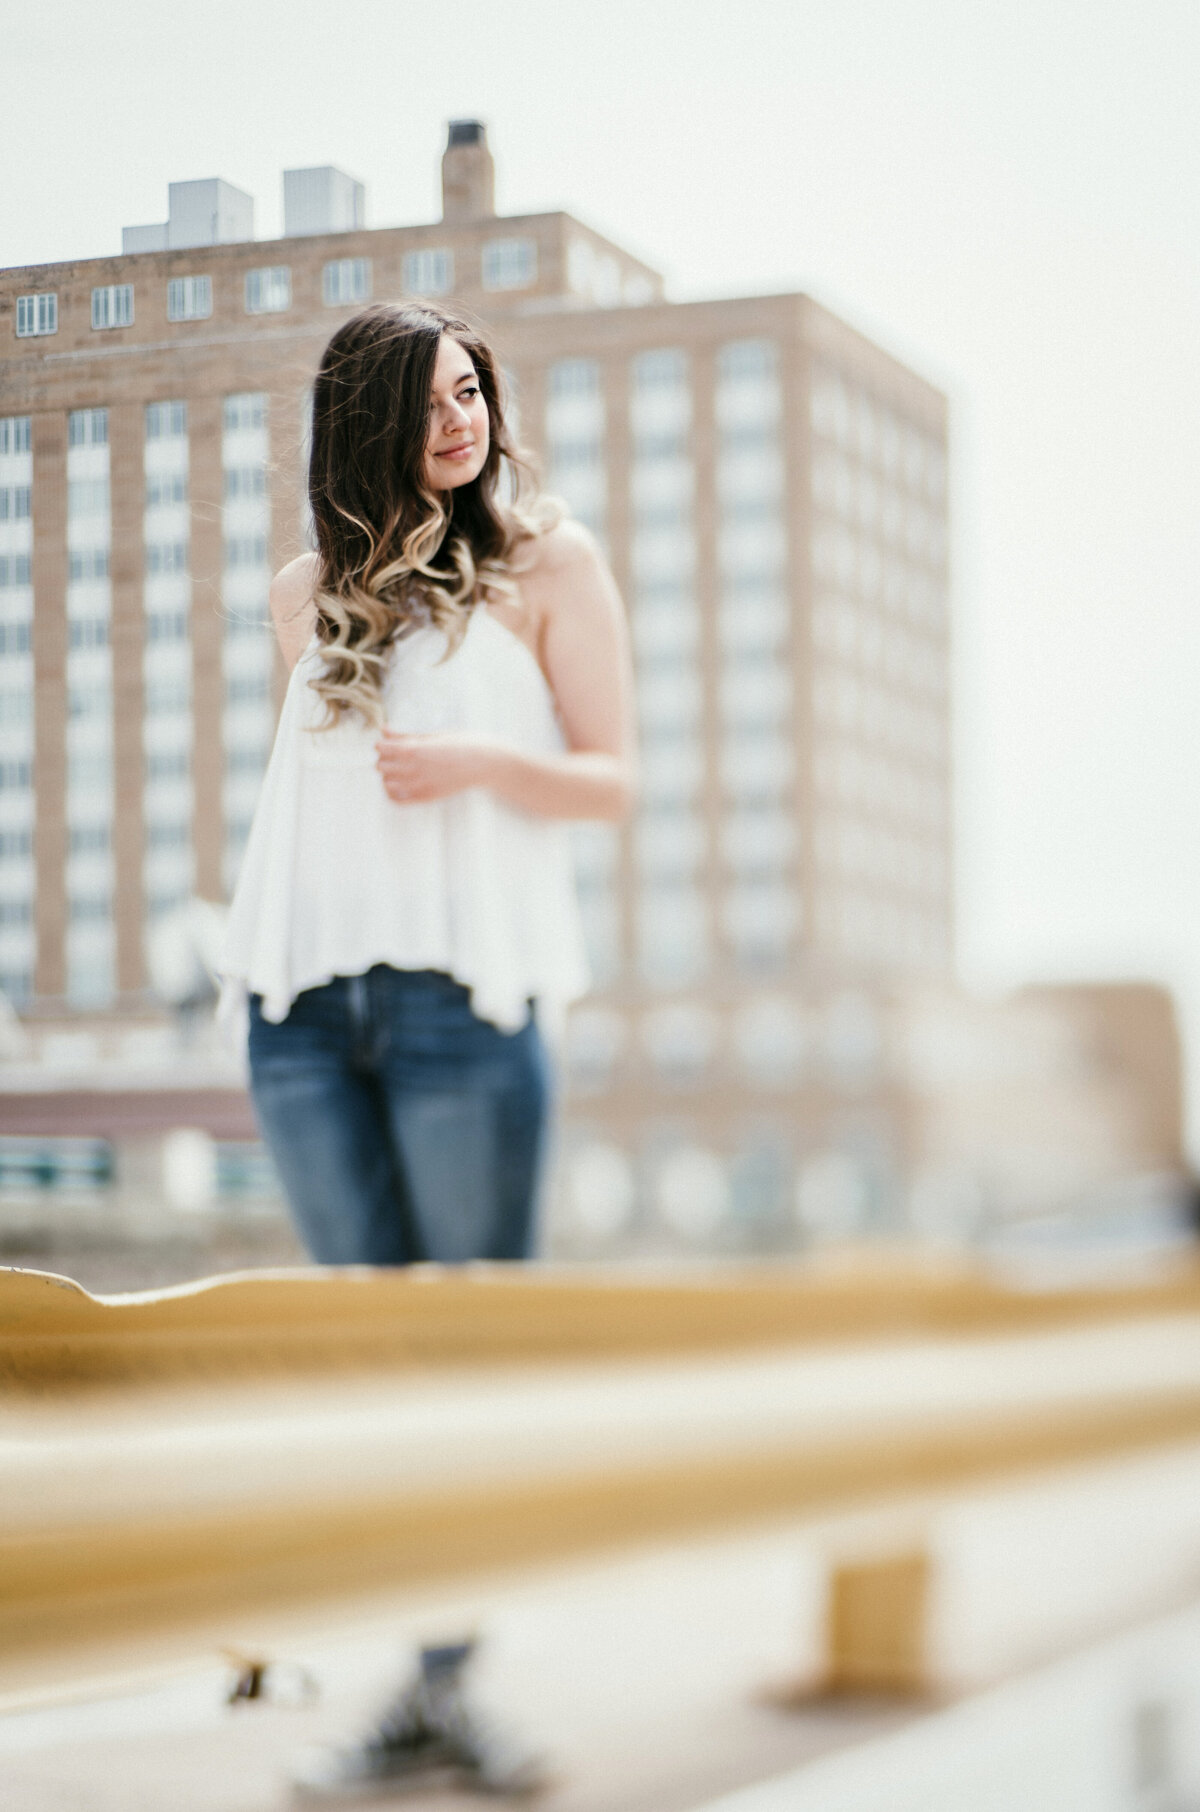 Indulge in rooftop reveries with senior portraits featuring skyline views. Shannon Kathleen Photography elevates your senior story against the backdrop of the city skyline. Secure your rooftop session